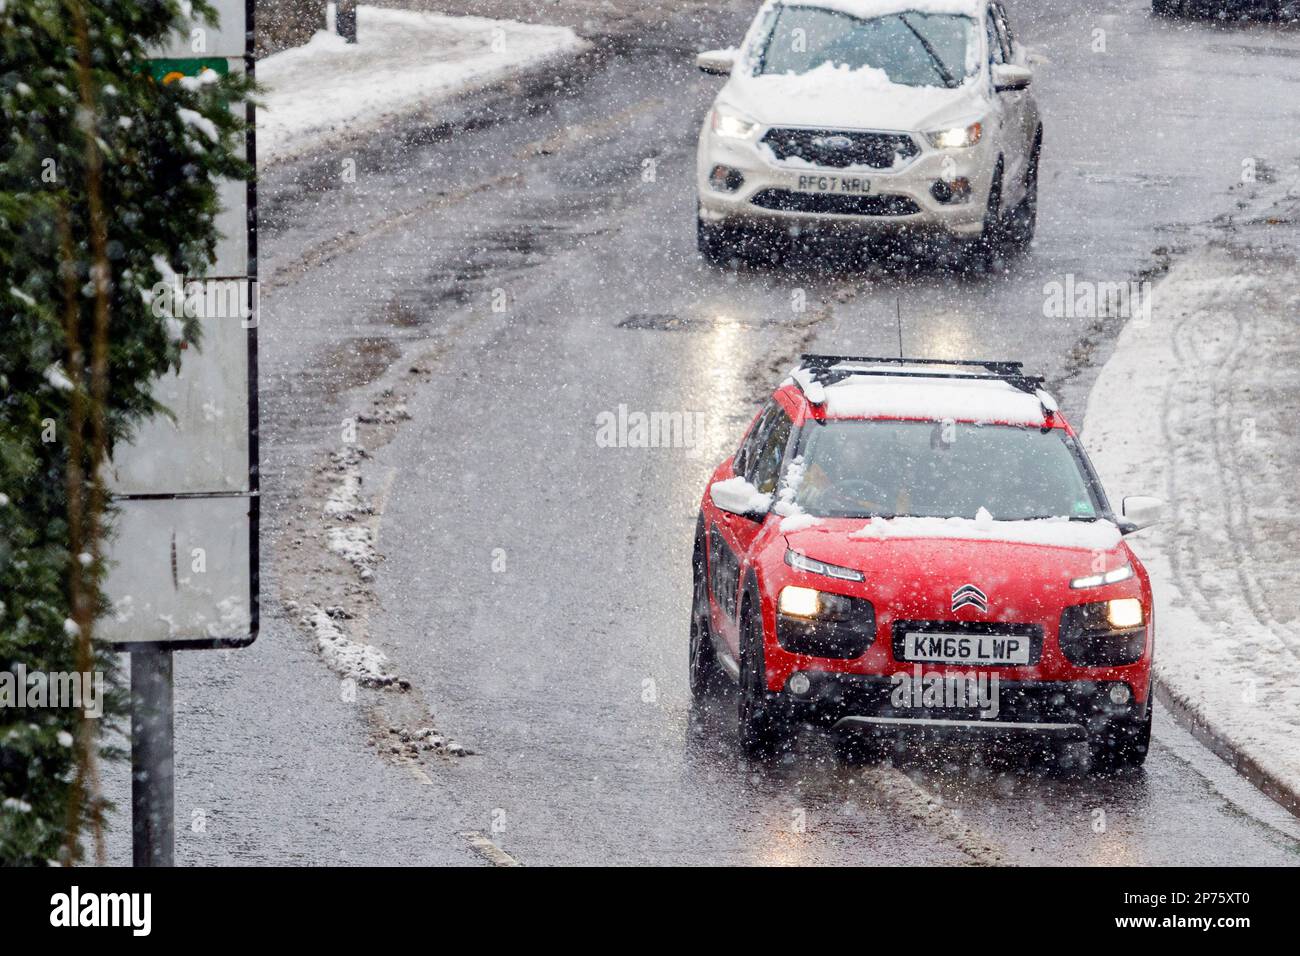 Chippenham, Wiltshire, UK. 8th March, 2023. Drivers are pictured driving through heavy snow showers. Credit: Lynchpics/Alamy Live News Stock Photo